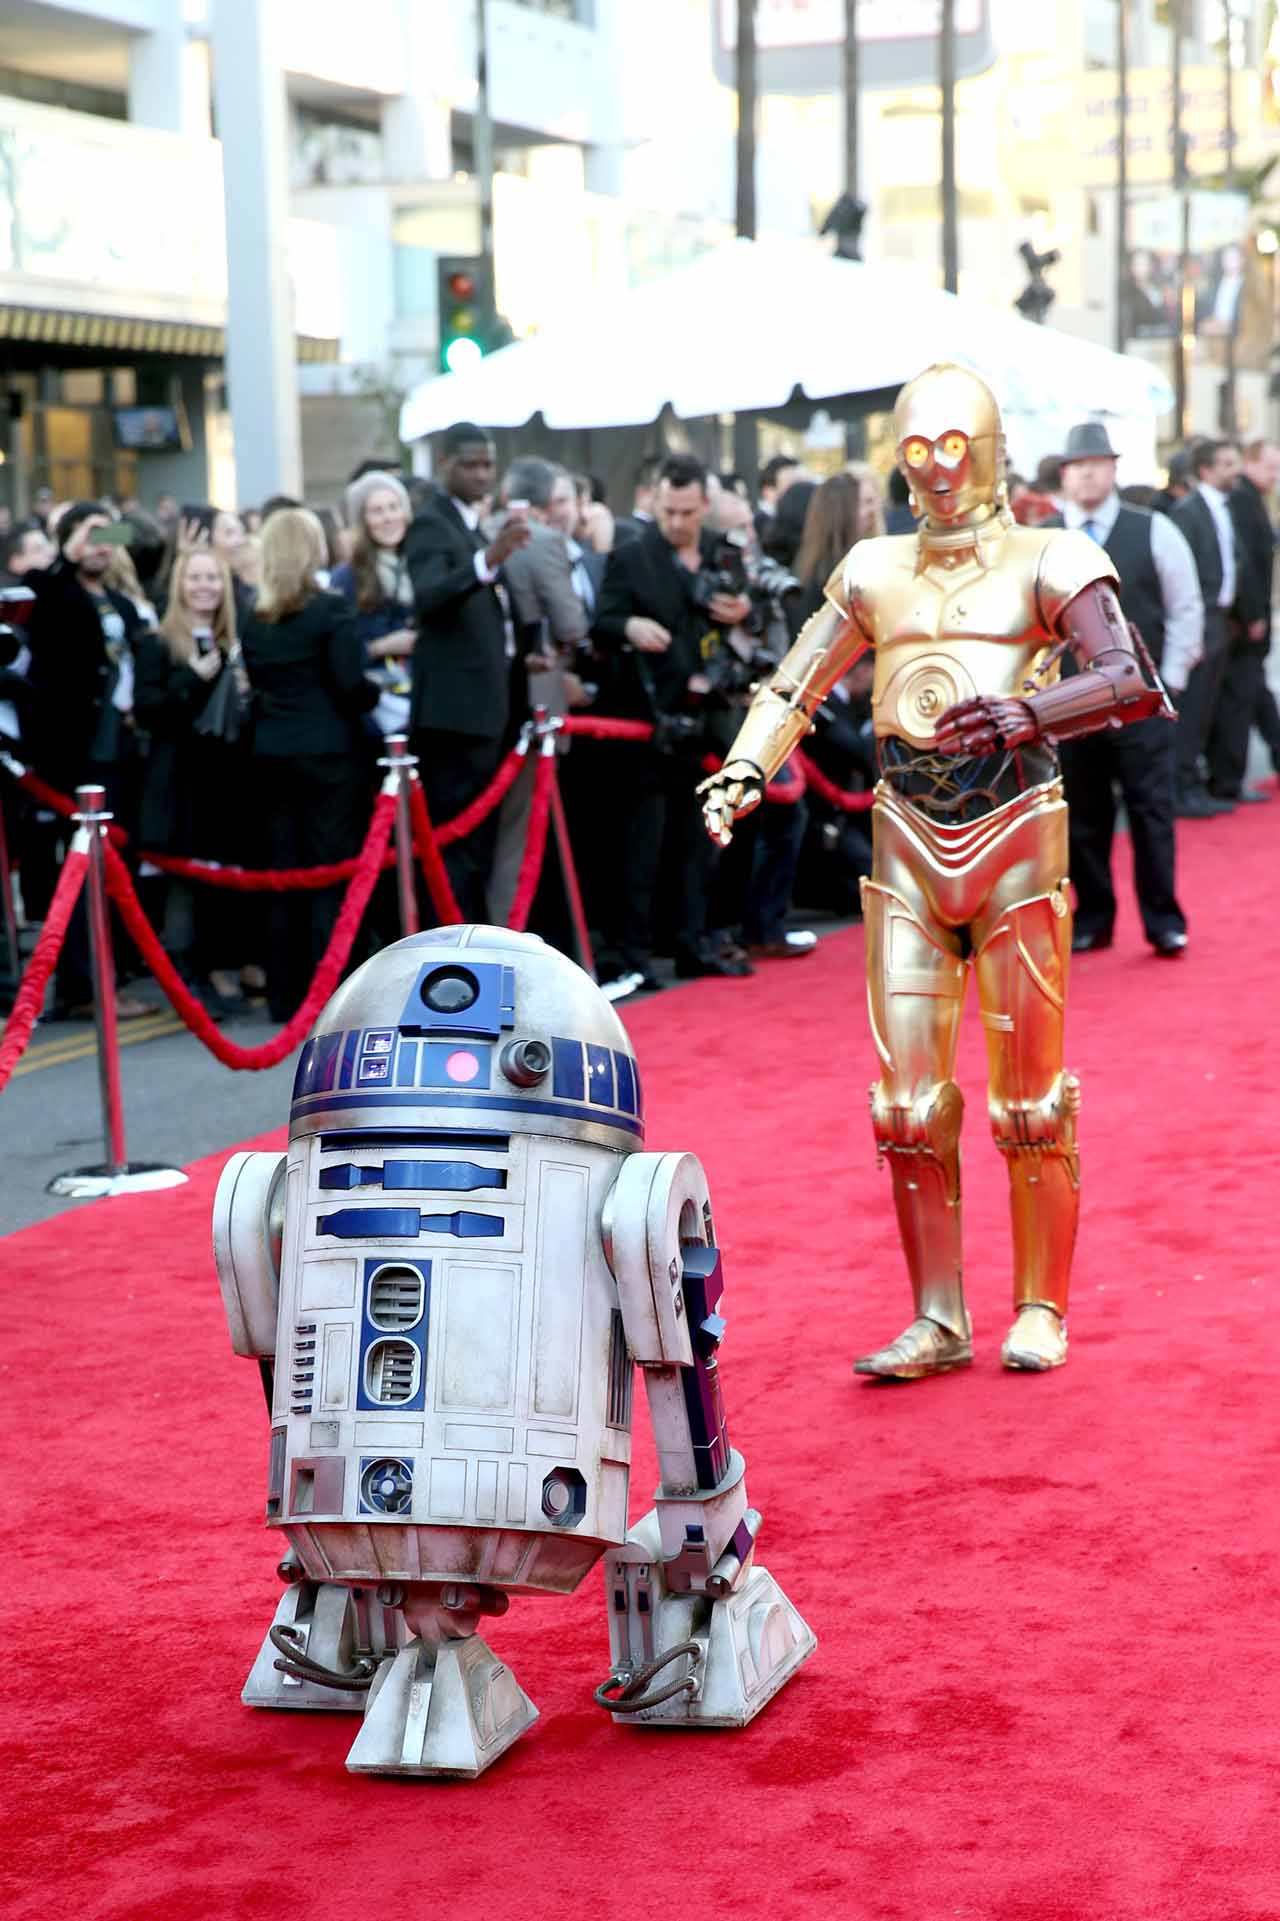 HOLLYWOOD, CA - DECEMBER 14:  R2-D2 (L) and C-3PO attend the World Premiere of ?Star Wars: The Force Awakens? at the Dolby, El Capitan, and TCL Theatres on December 14, 2015 in Hollywood, California.  (Photo by Jesse Grant/Getty Images for Disney) *** Local Caption *** R2-D2;C-3PO